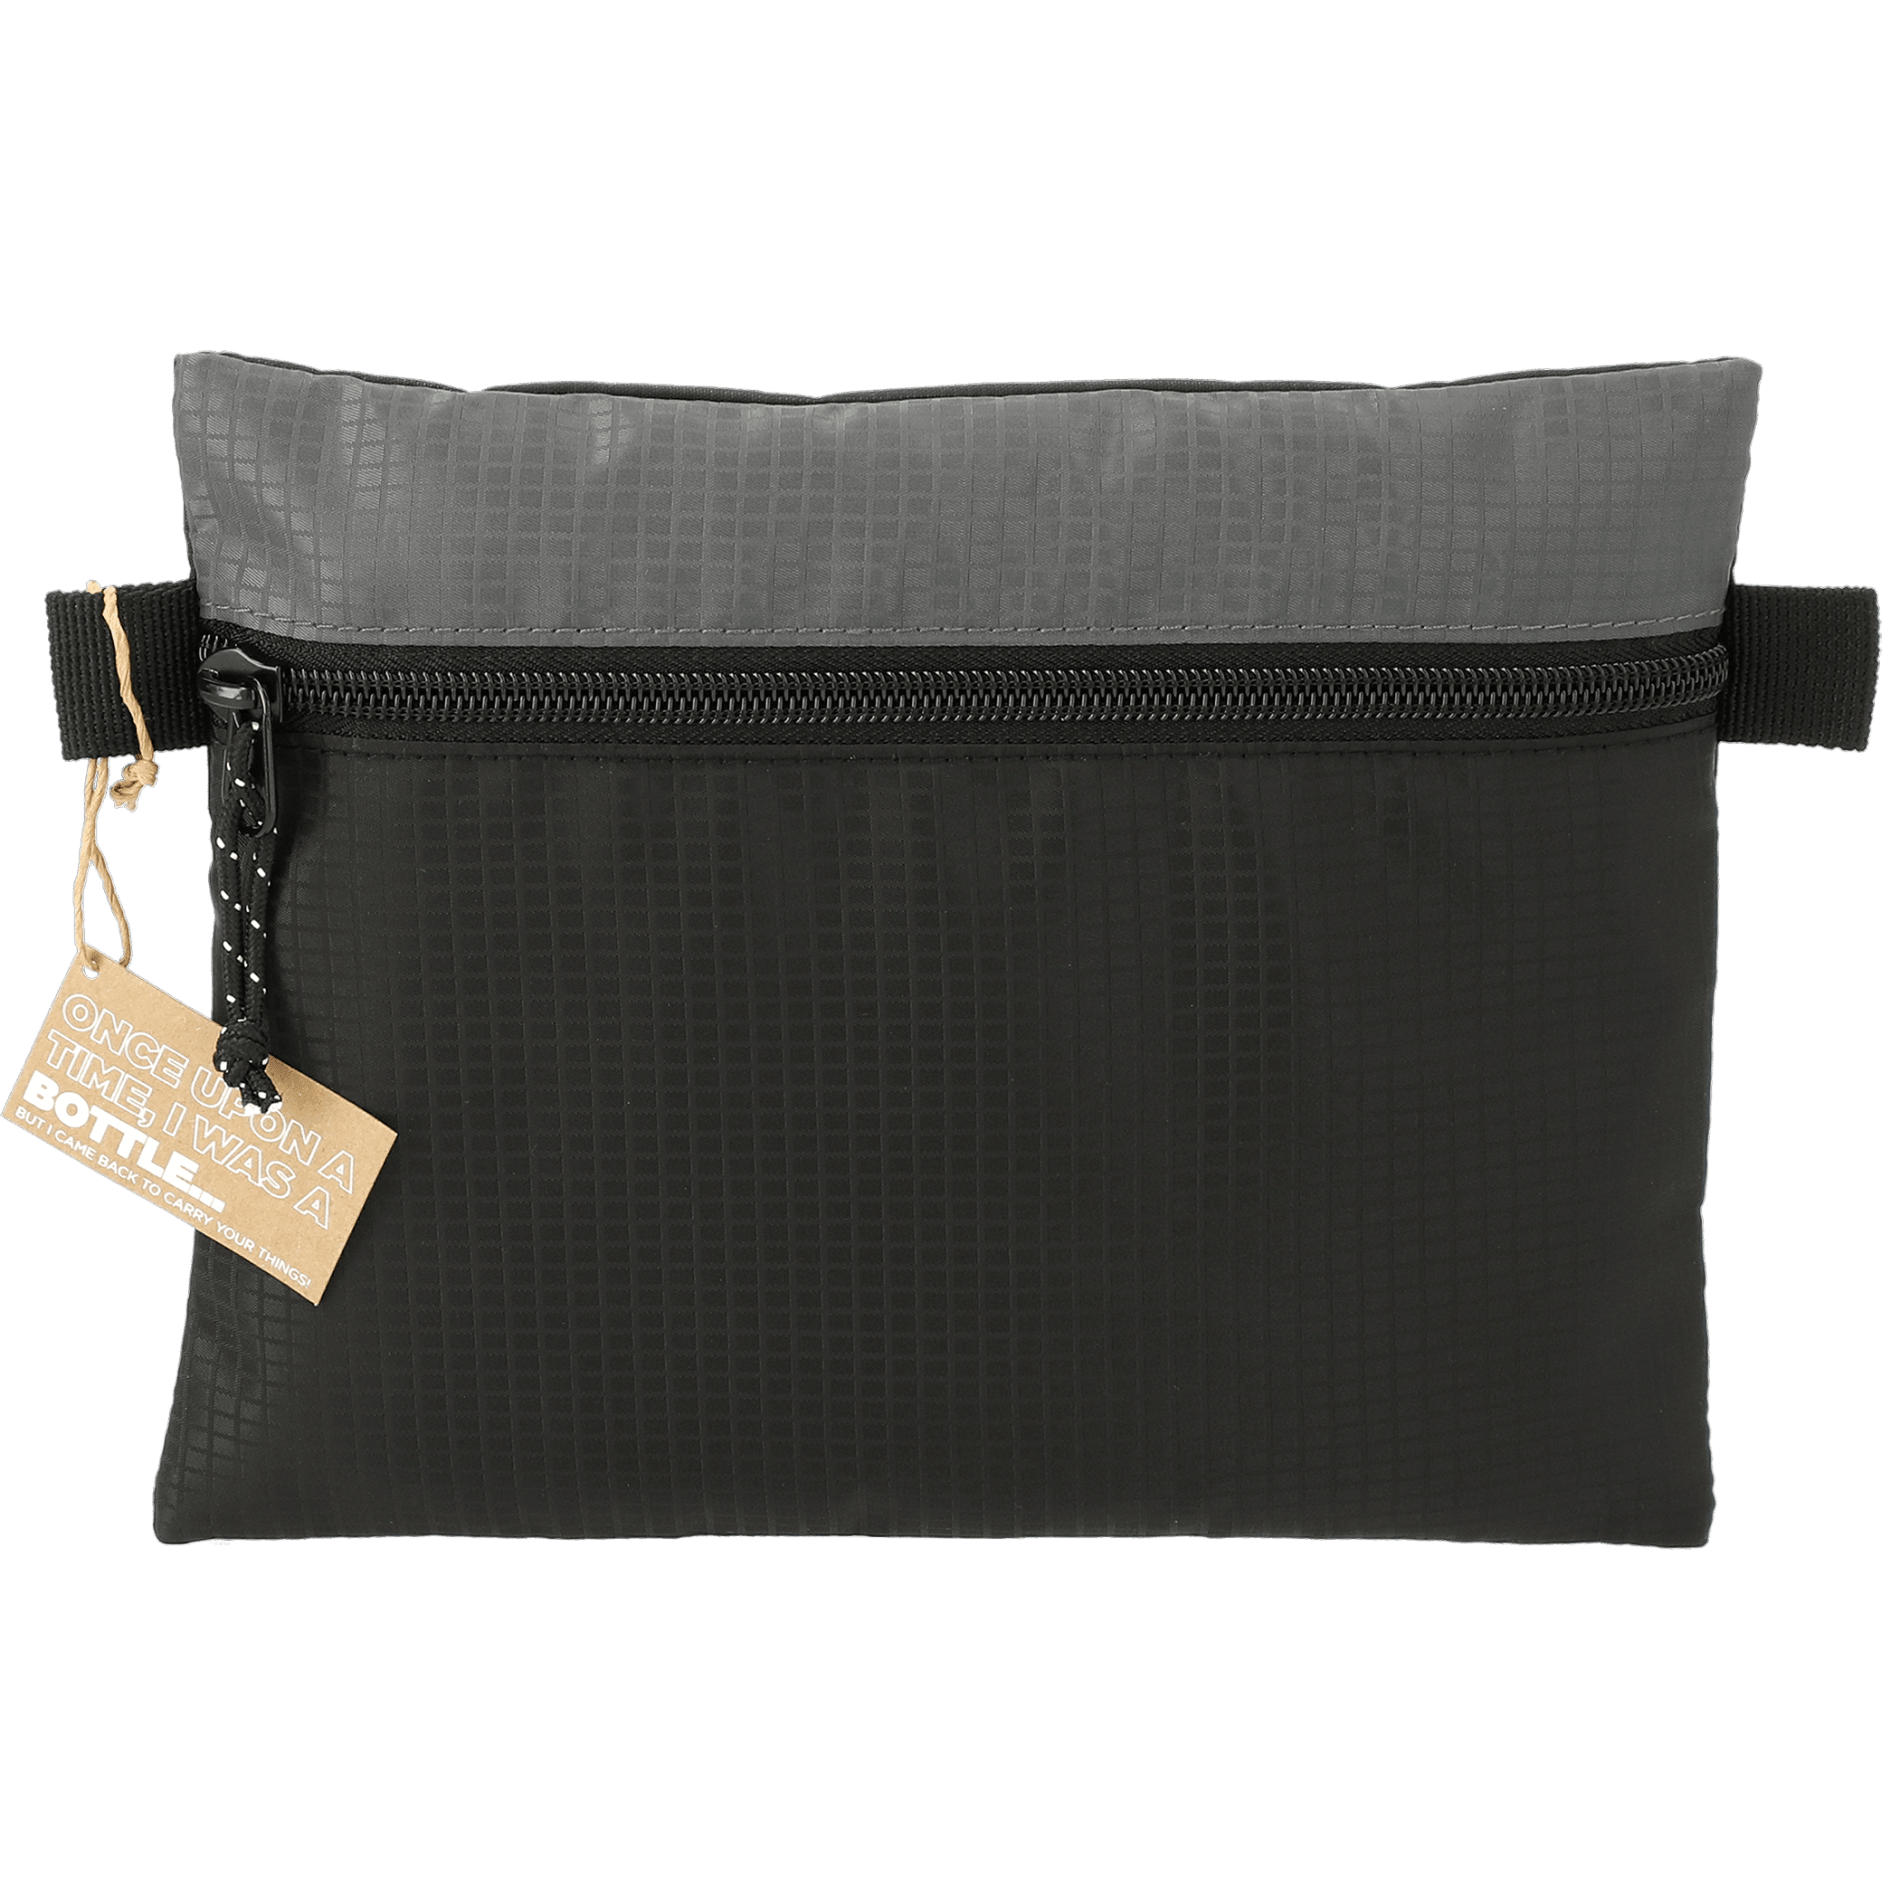 LEEDS 3750-56 - NBN Trailhead Recycled Zip Pouch